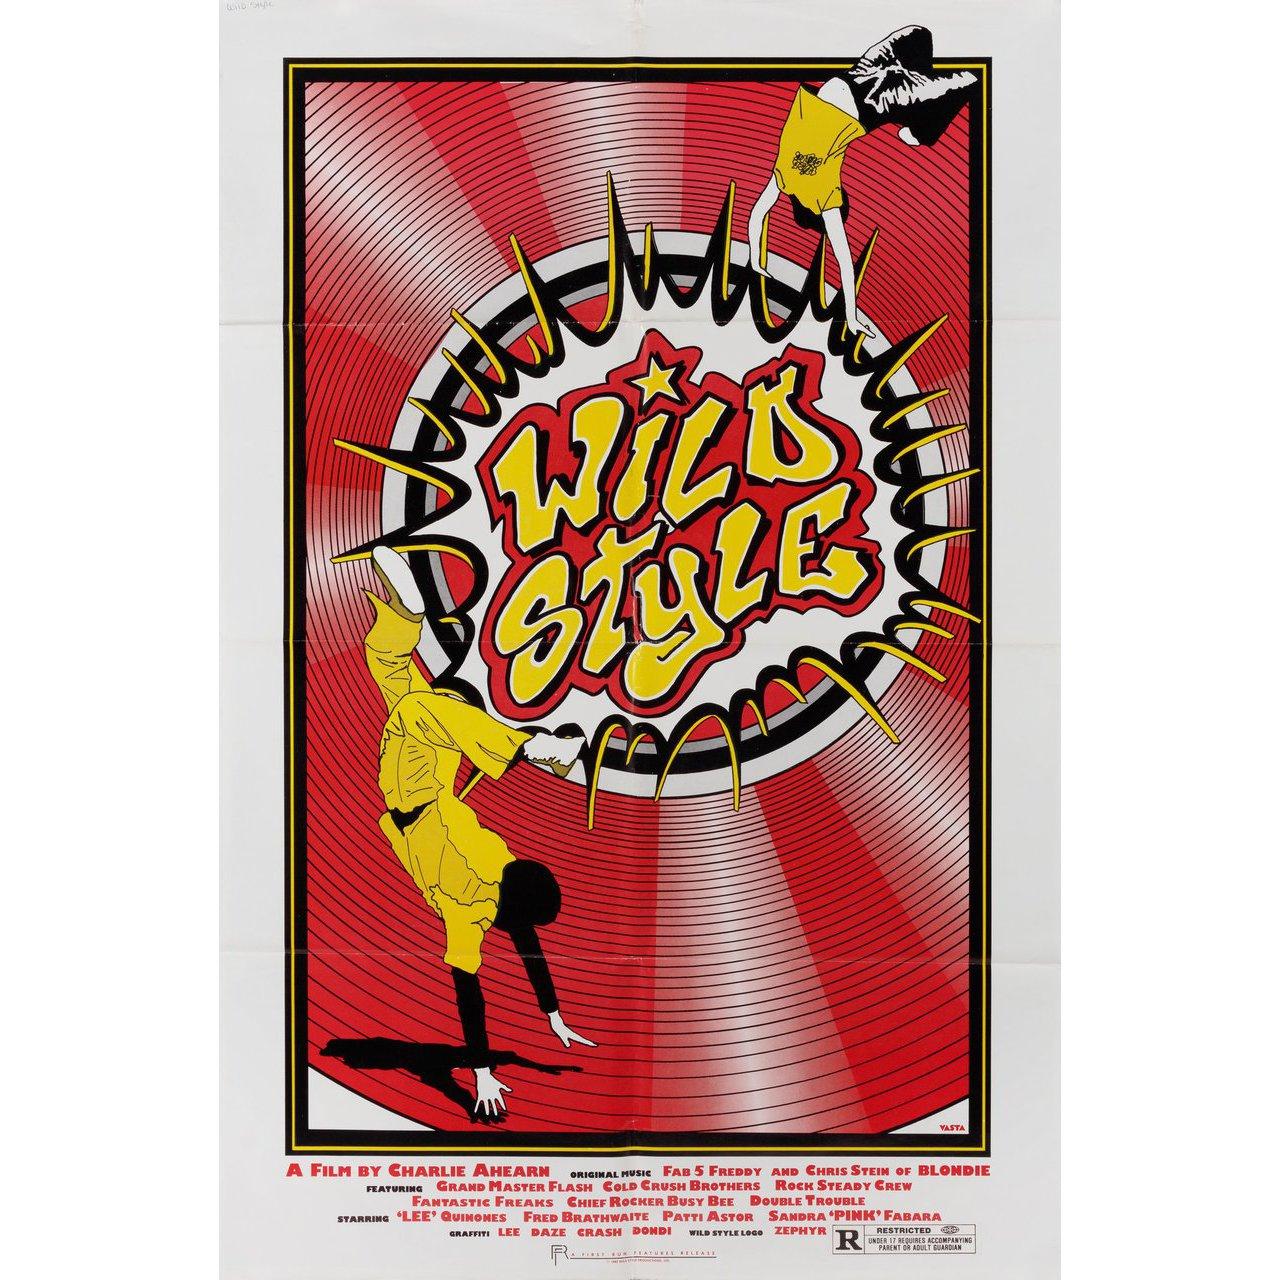 Original 1983 U.S. one sheet poster by Vasta for the first U.S. theatrical release of the documentary film Wild Style directed by Charlie Ahearn with 'Lee' George Quinones / Fab 5 Freddy / Patti Astor / Andrew Witten. Very Good-Fine condition,